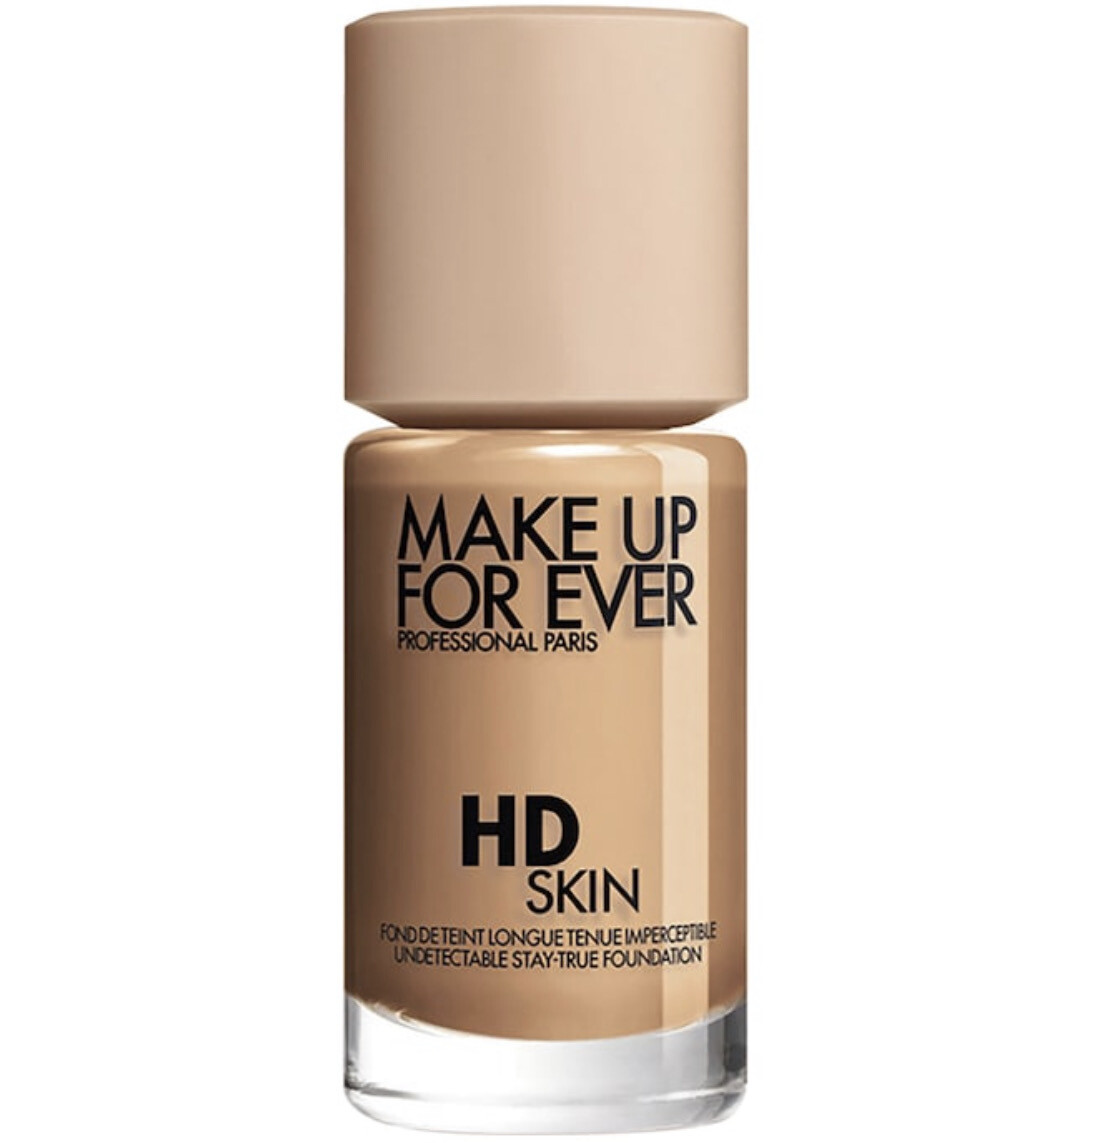 Make Up For Ever - HD Skin Undetectable Longwear Foundation | 2Y36 Warm Honey - for medium to Tan skin tones with yellow undertones